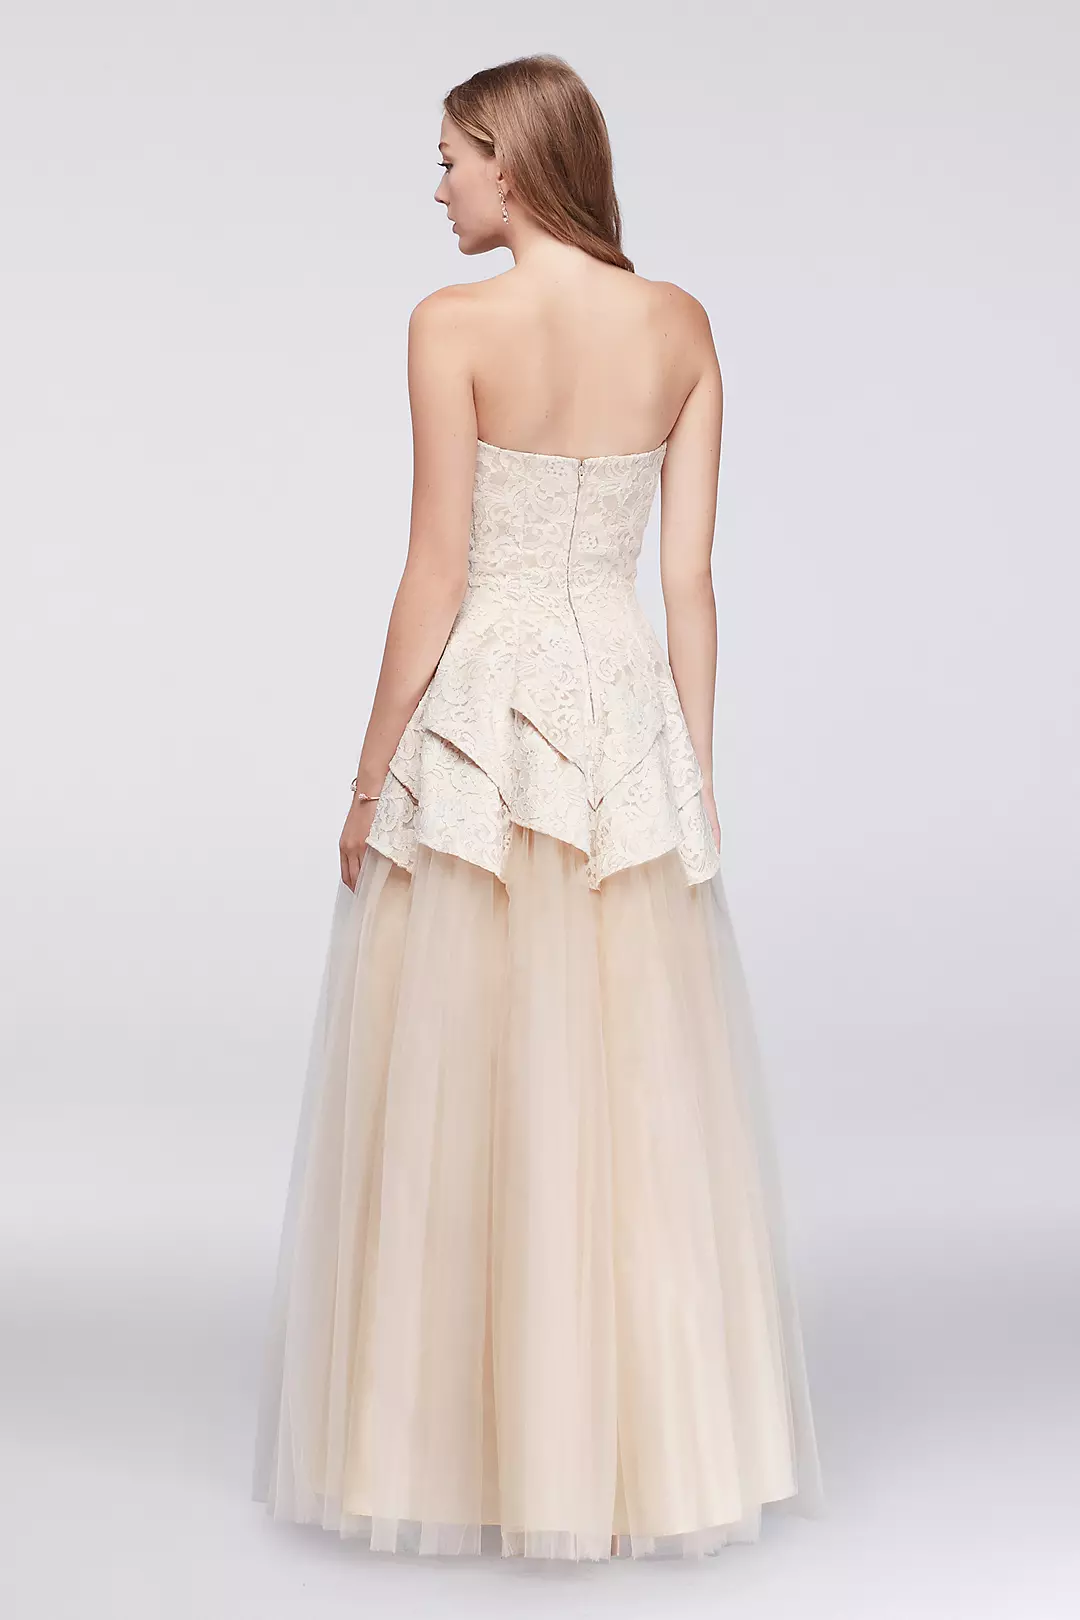 Lace and Tulle Ball Gown with Tulip Bodice Image 2